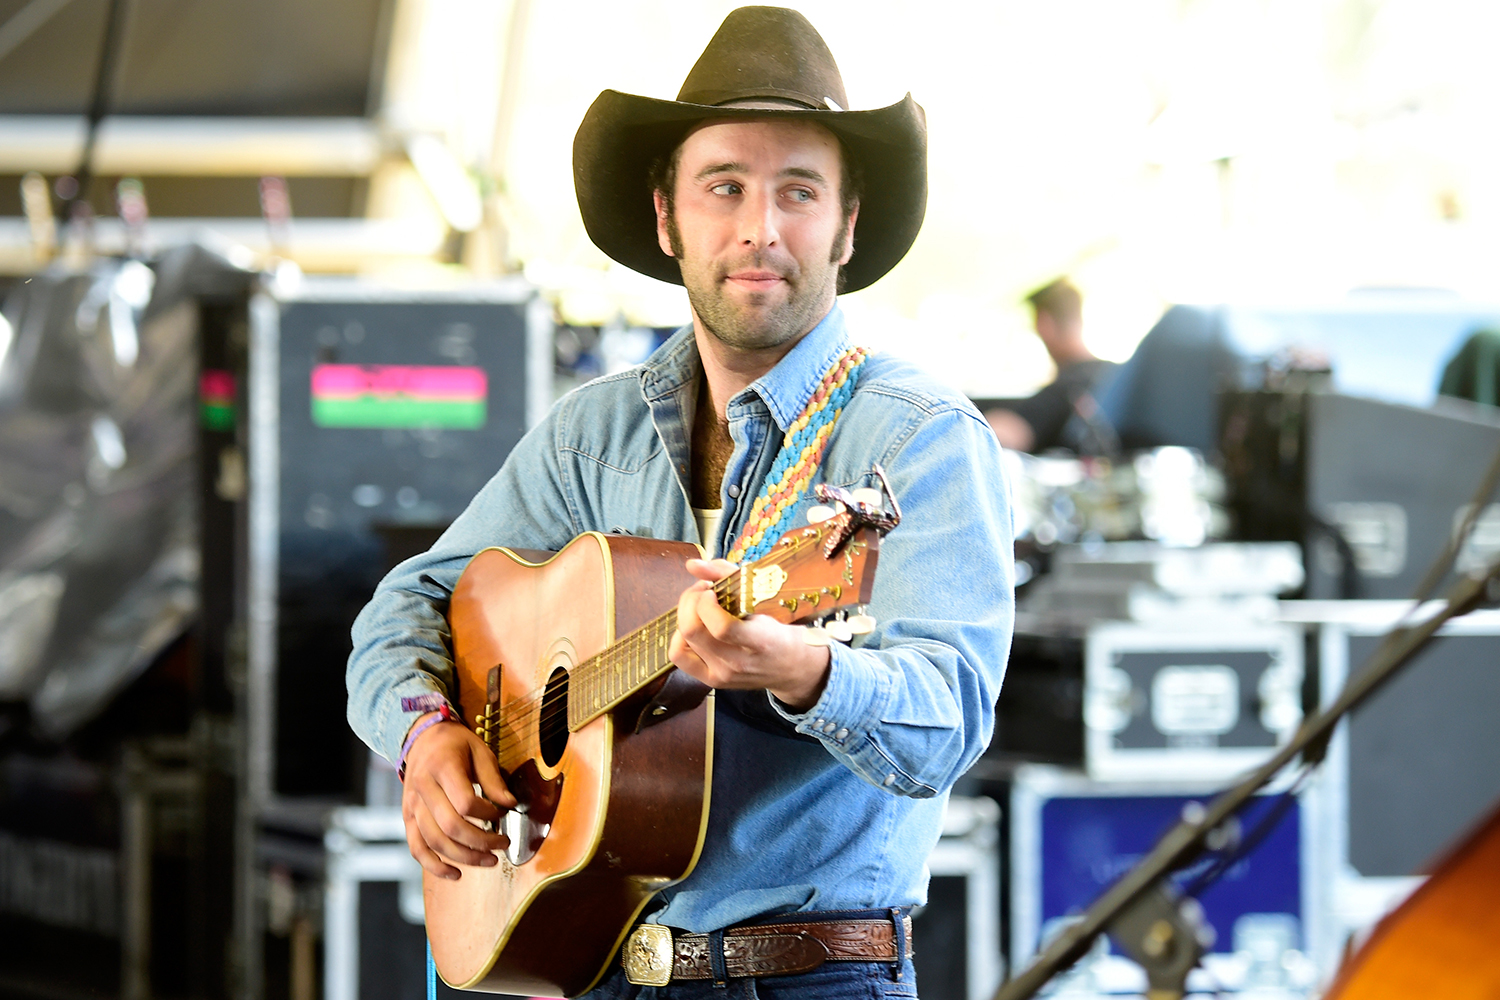 Country singer Luke Bell found dead at 32 after going missing